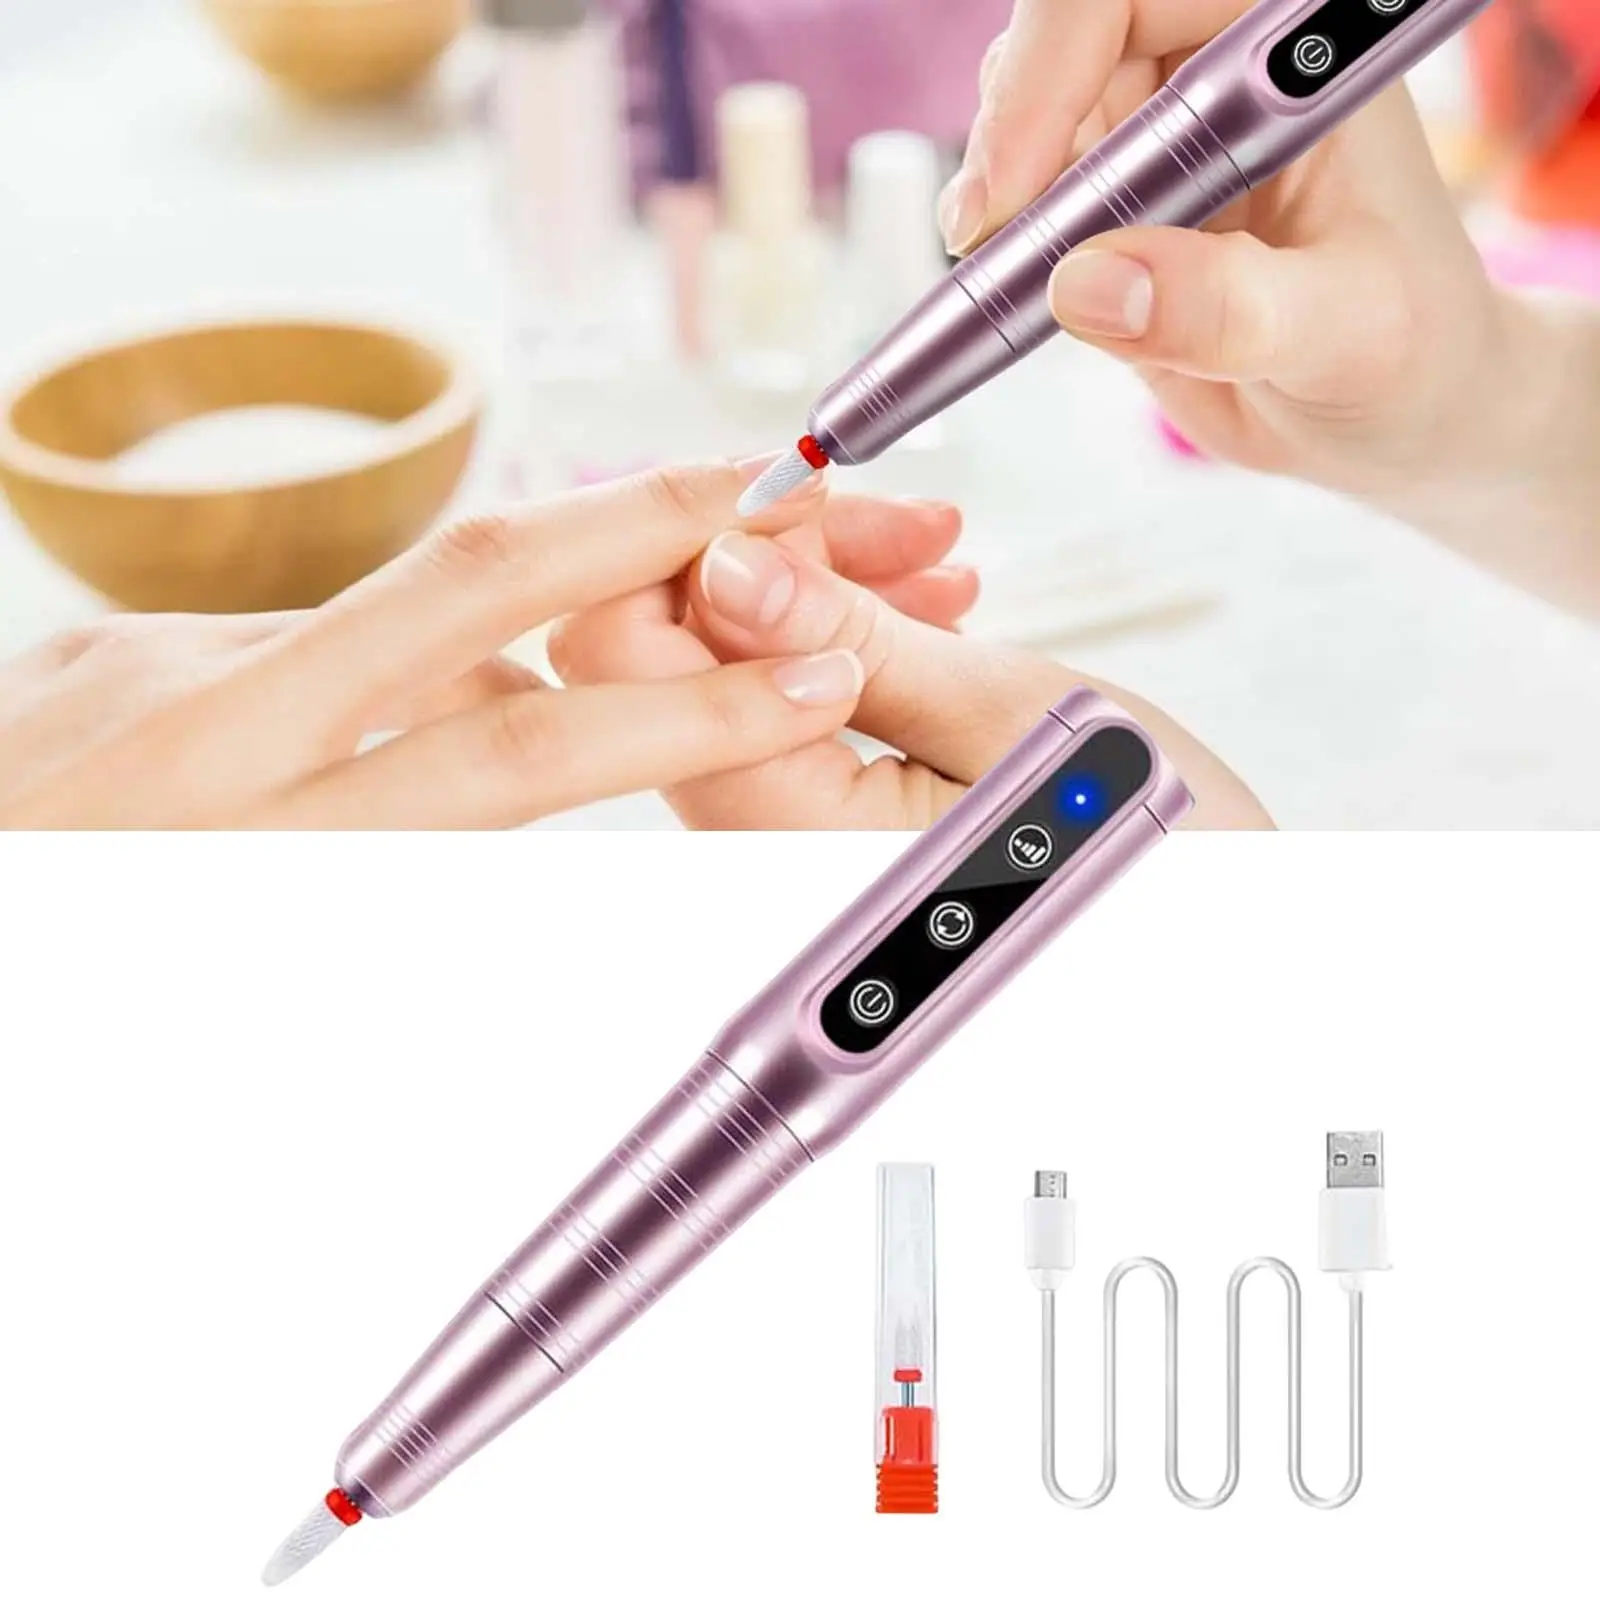 Professional Nail Filer Kit Nail Tools Rechargeable Cordless USB Electric Nail Drill Machine for Removing Acrylic Gel Nails